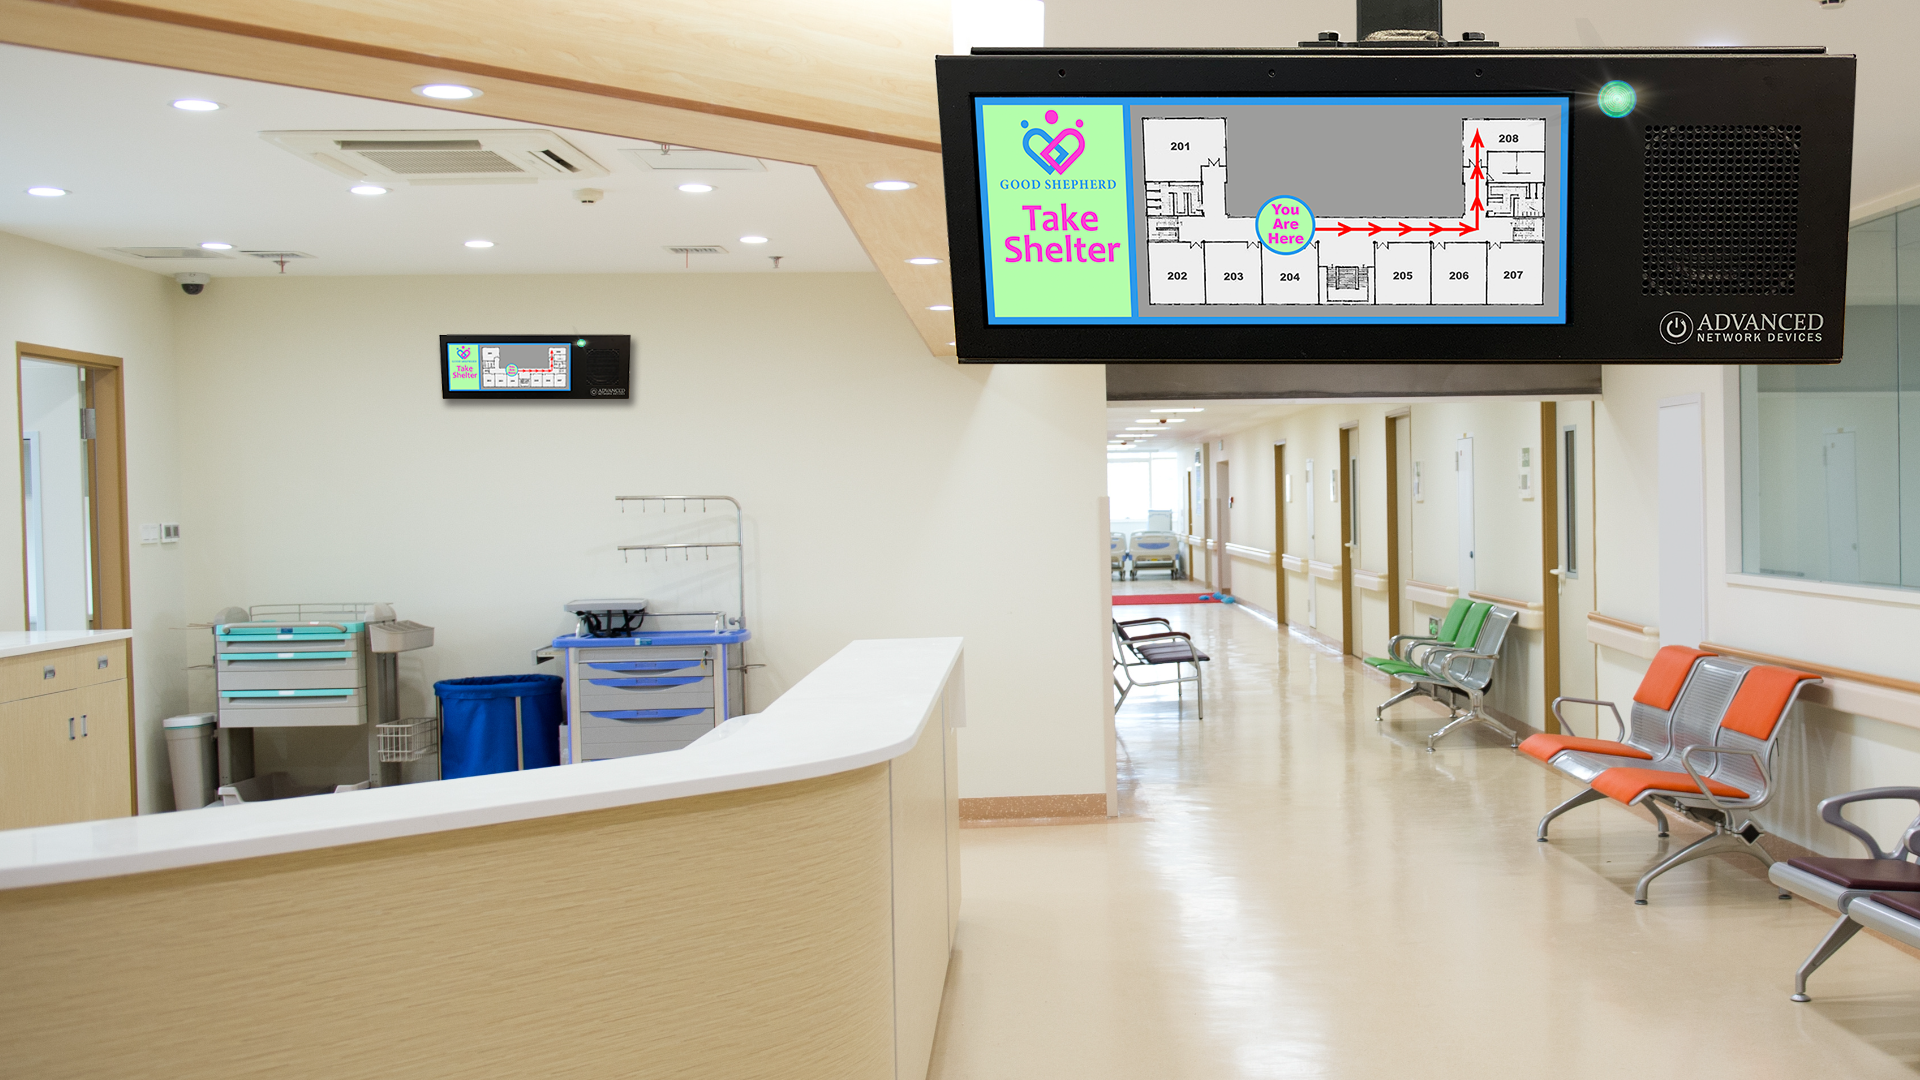 An IP display device shows map to take shelter in a hospital hallway.